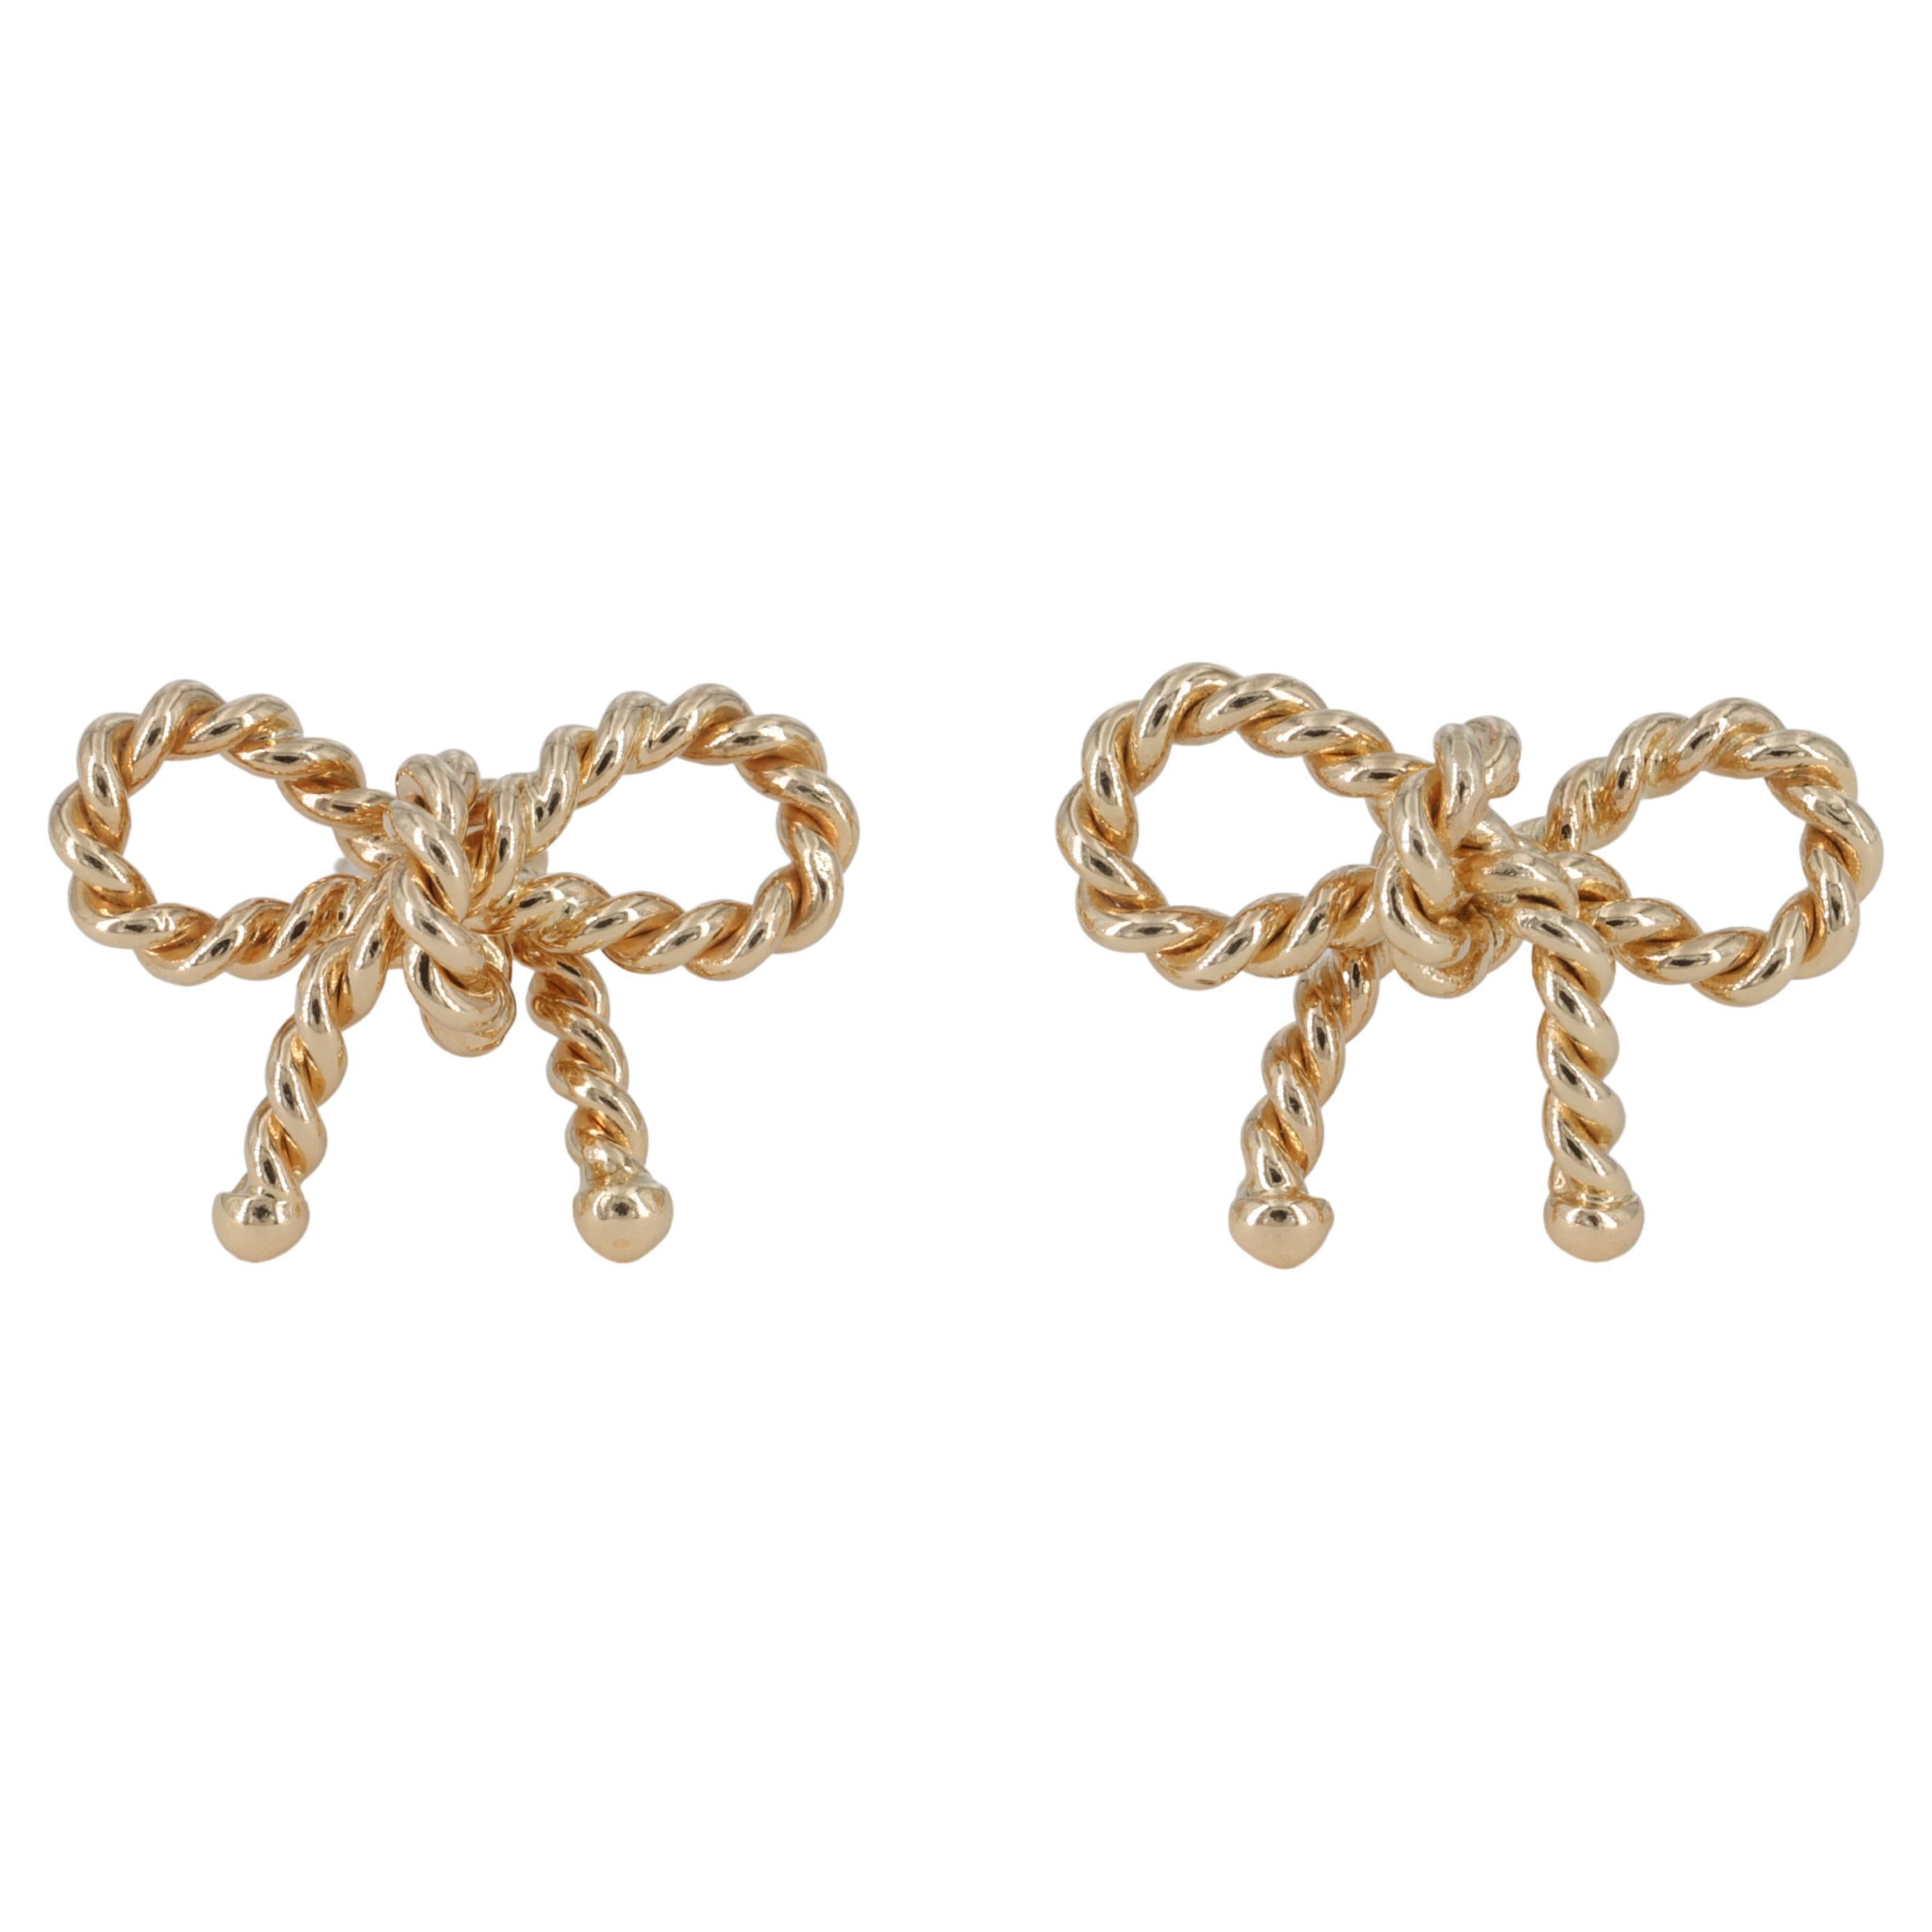 The Pink Reef bow stud